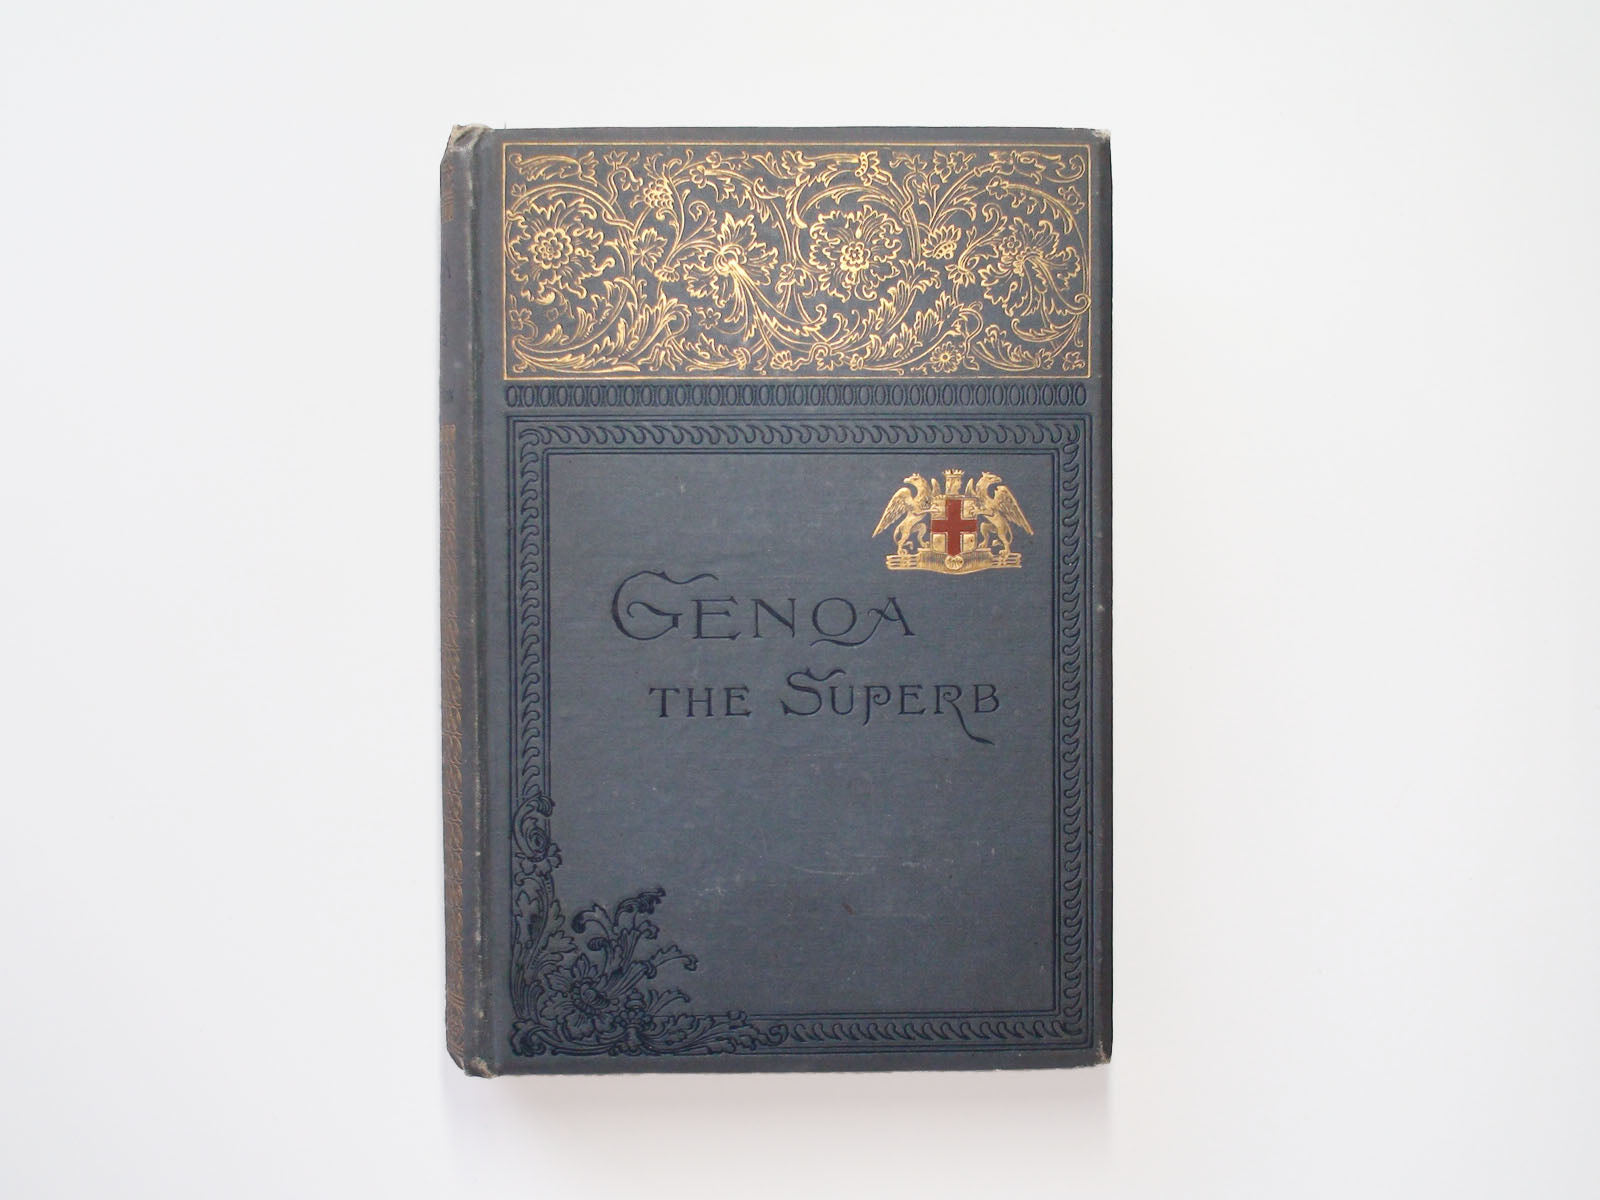 Genoa, The Superb, By Virginia W. Johnson, Illustrated, 1st Ed, 1892